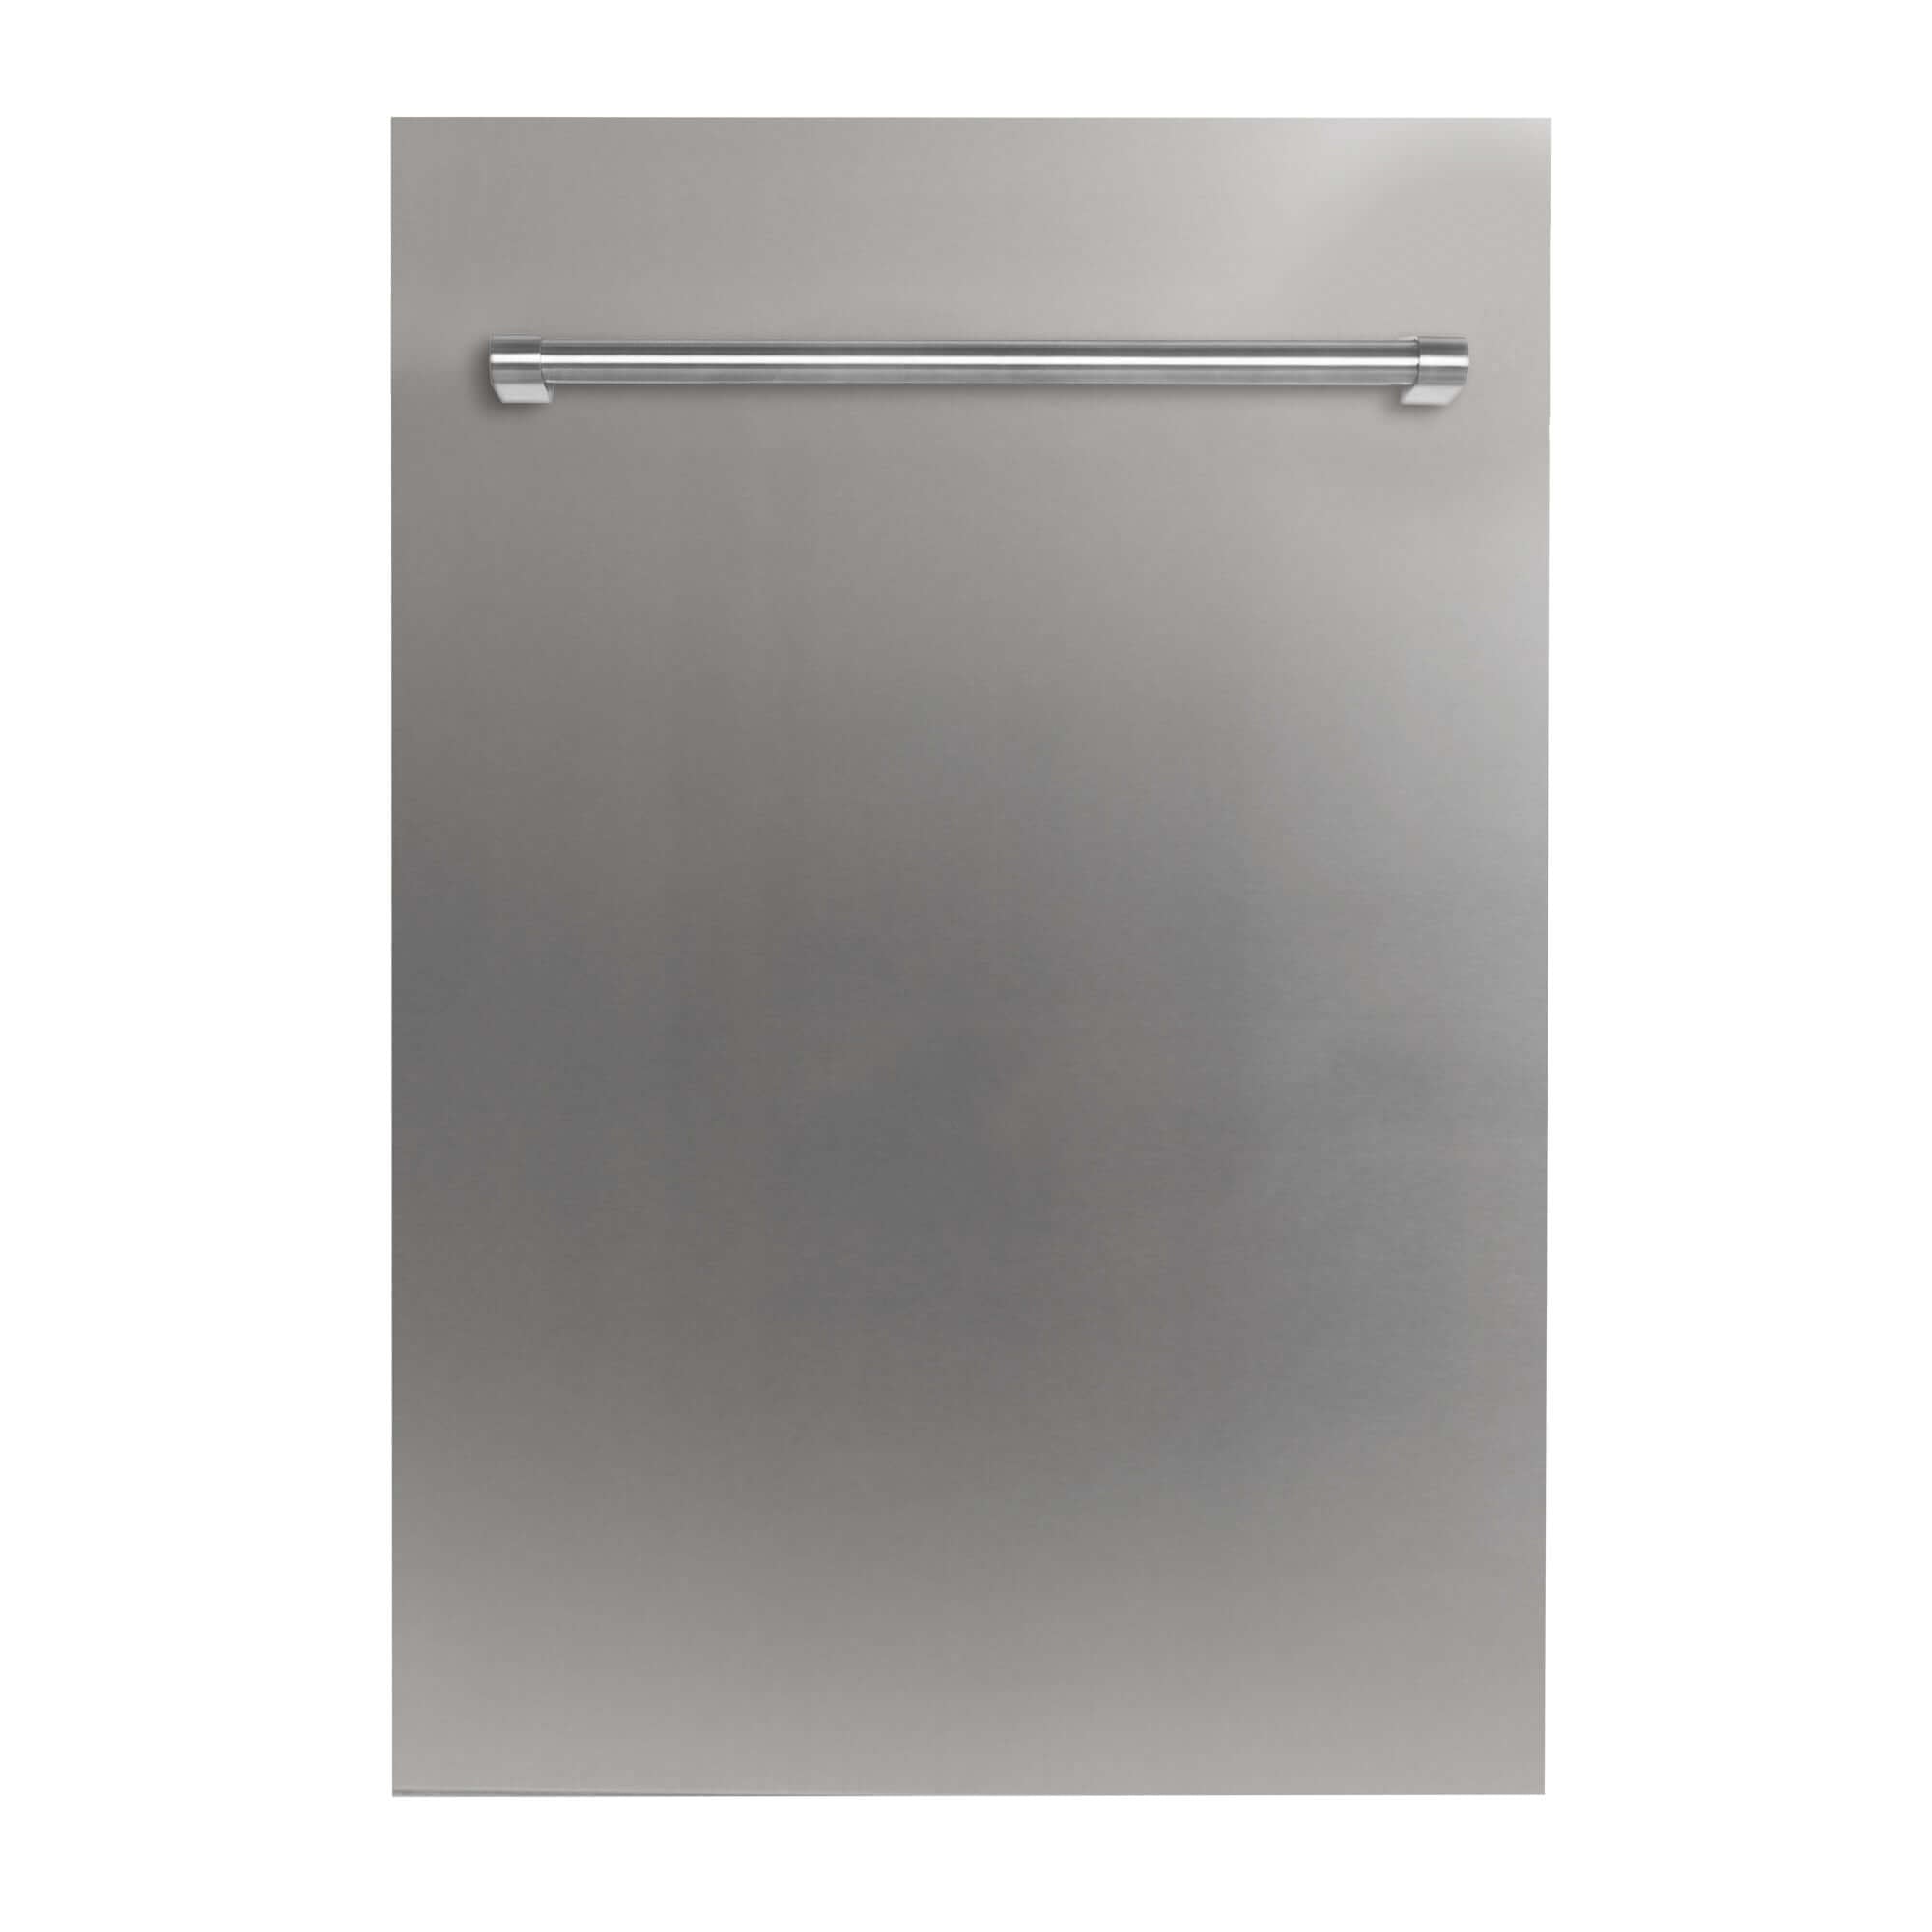 ZLINE 18 in. Compact Stainless Steel Top Control Built-In Dishwasher with Stainless Steel Tub and Traditional Style Handle, 52dBa (DW-304-H-18)